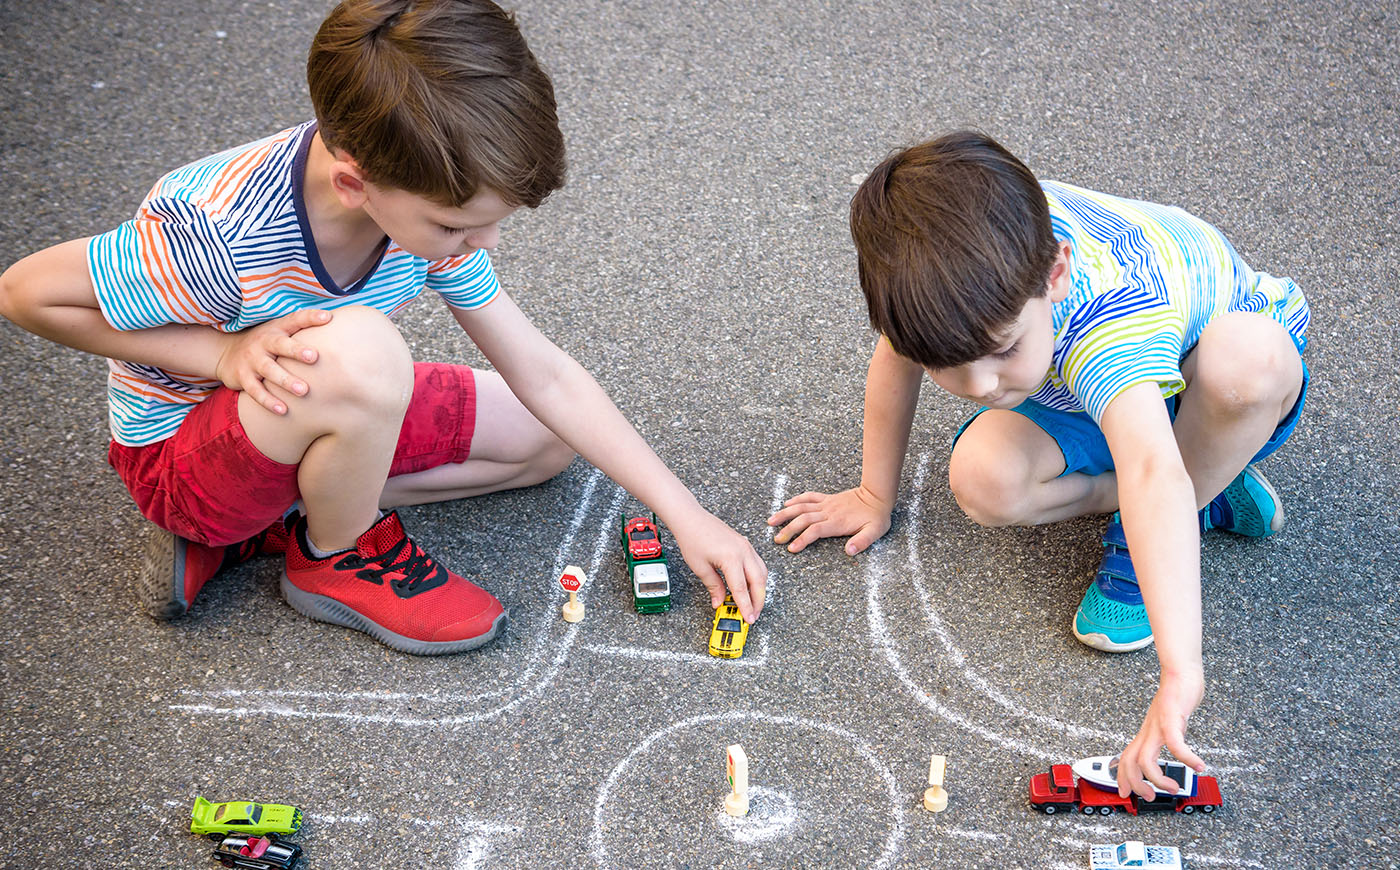 Two little boys playing with toy cars on a chalk-drawn intersection